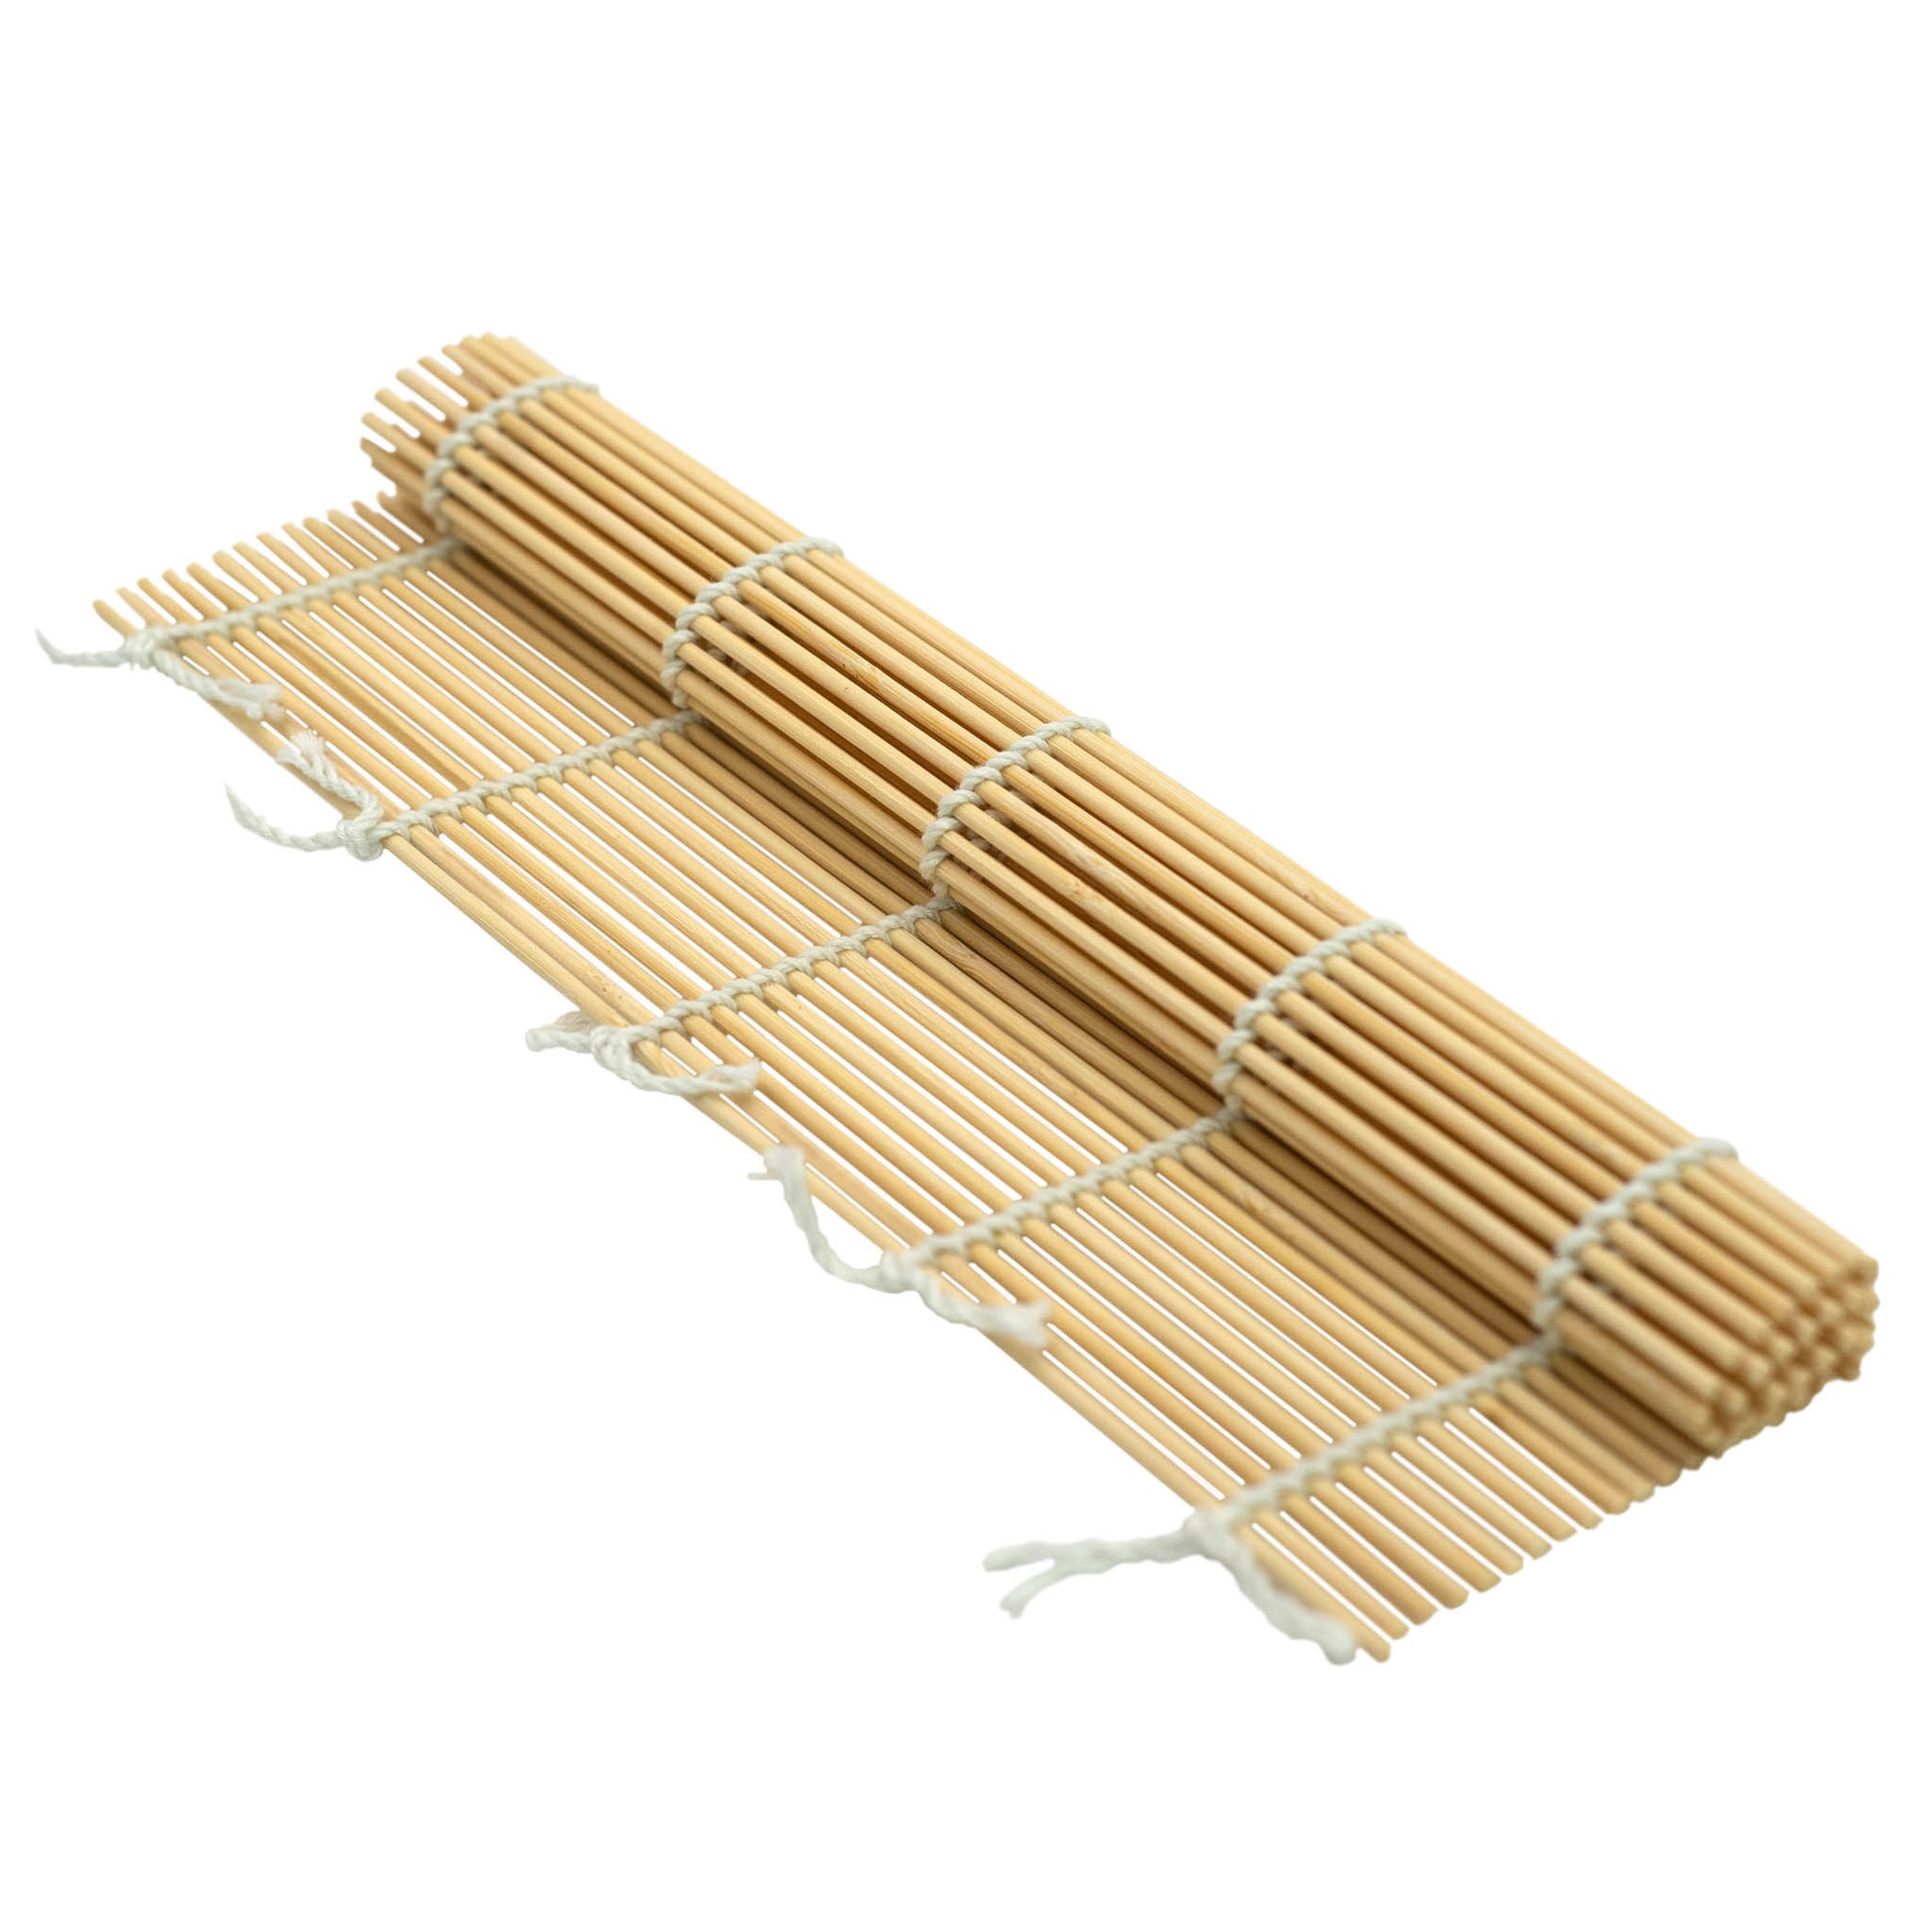 Bamboo draining mat for cheese making or sushi roll making